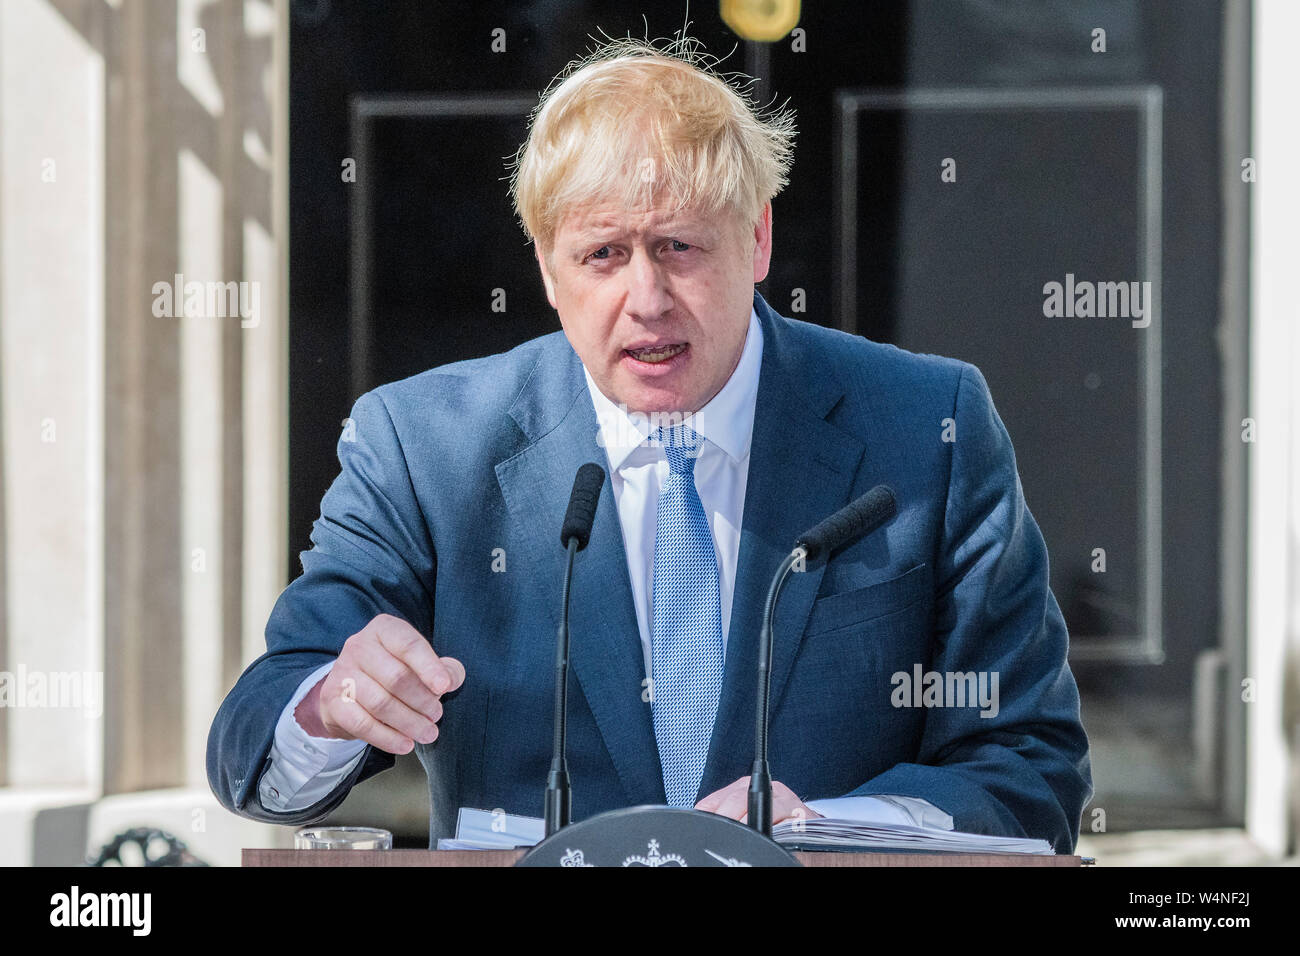 Downing Street, London, UK. 24th July, 2019. Boris Johnson, The new Prime Minister, arrives in Downing Street. he is a replacement for Theresa May after she stepped down. Credit: Guy Bell/Alamy Live News Stock Photo